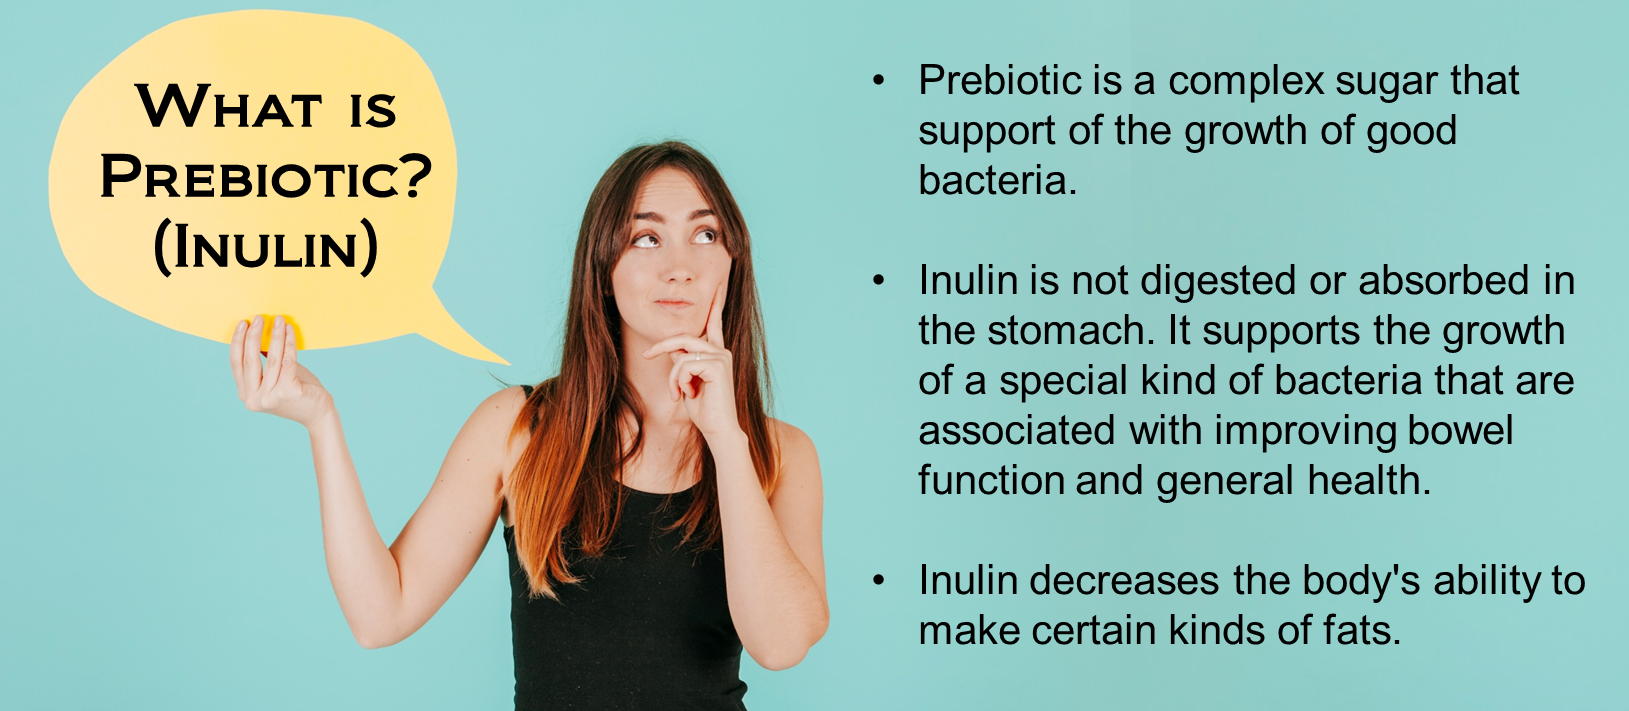 0616297111657-1631-what-is-prebiotic2.png